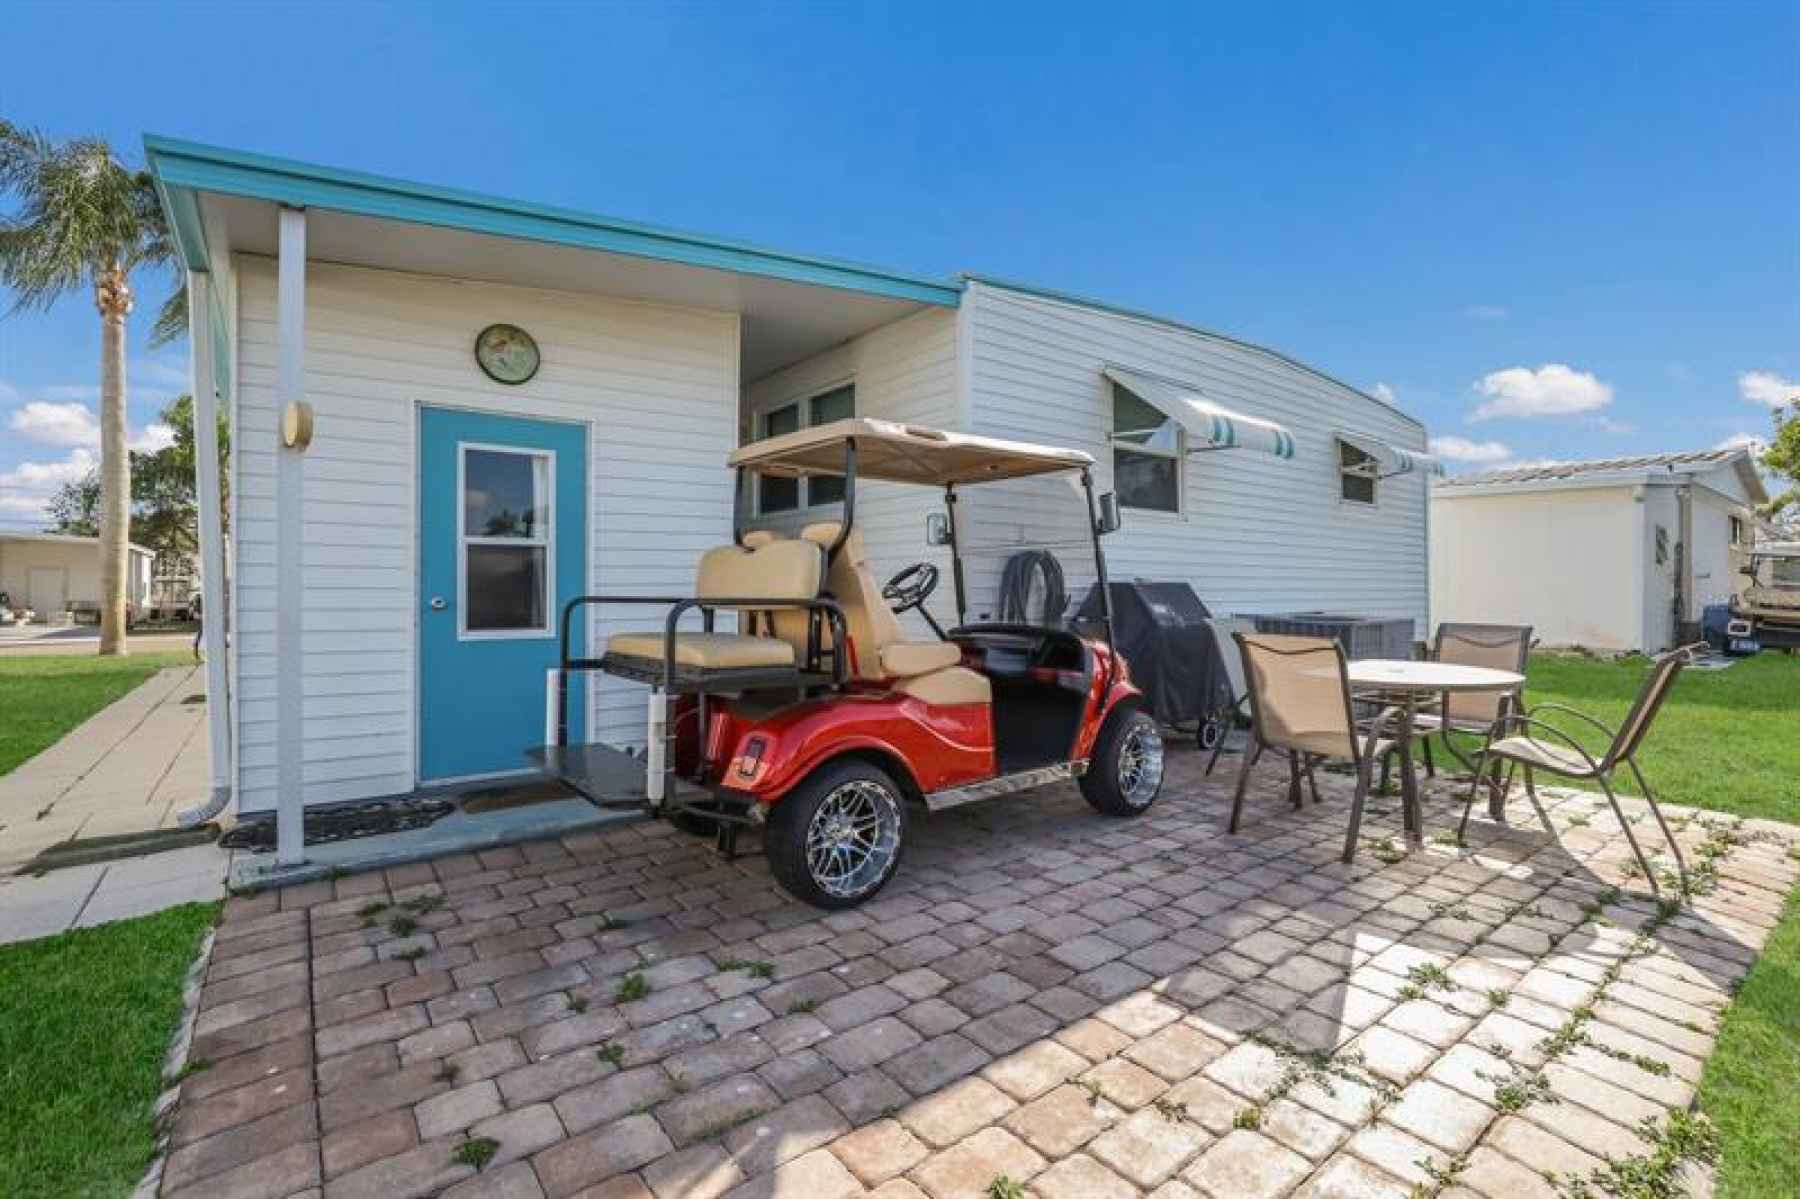 Golf cart does not convey with the home.